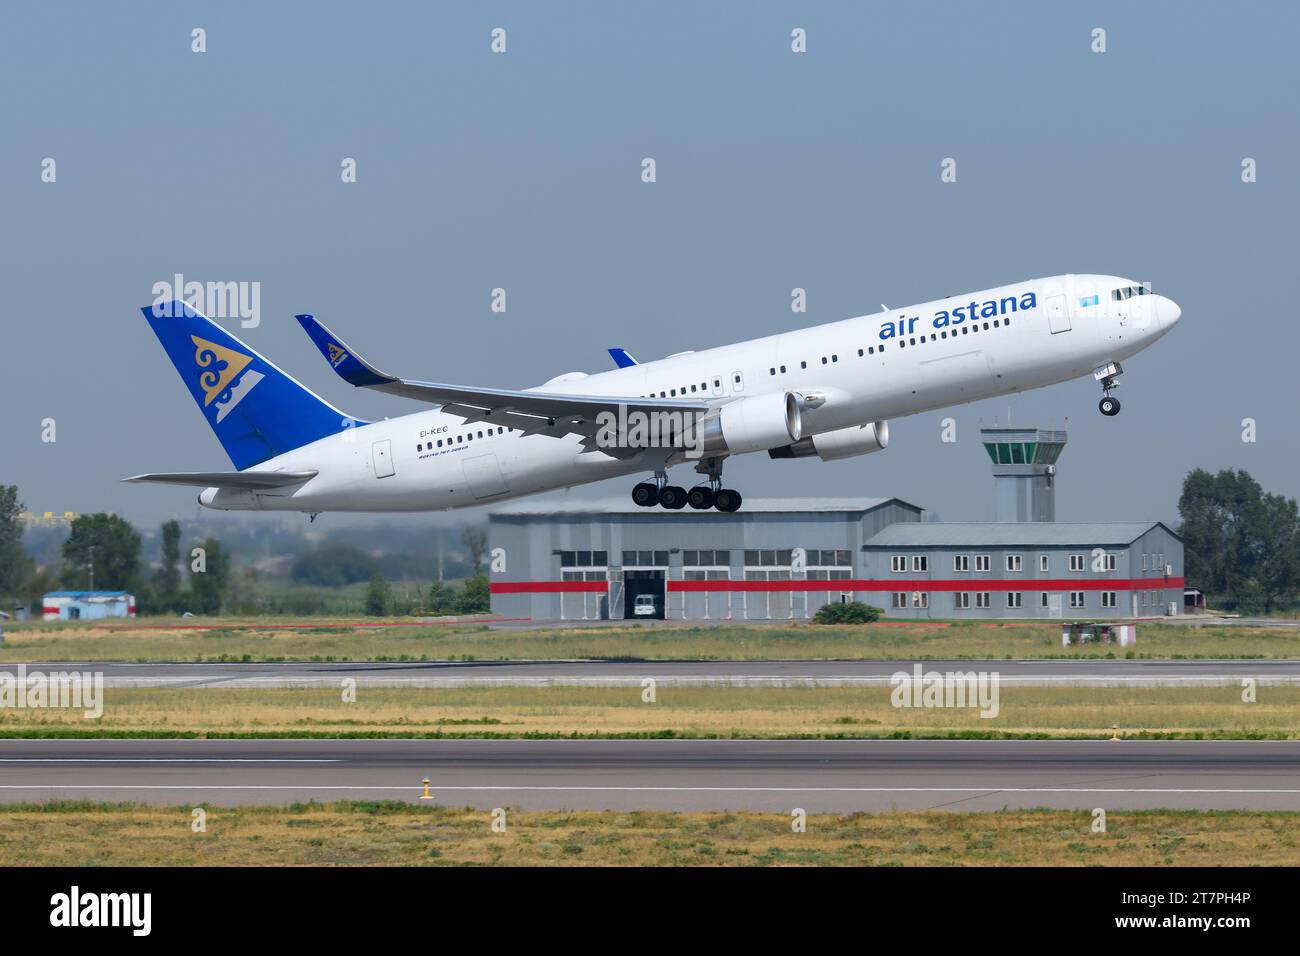 Air Astana Boeing 767 aircraft departing Almaty Airport. Plane 767 of AirAstana airline during take off. B767 airplane of Air Astana. Stock Photo